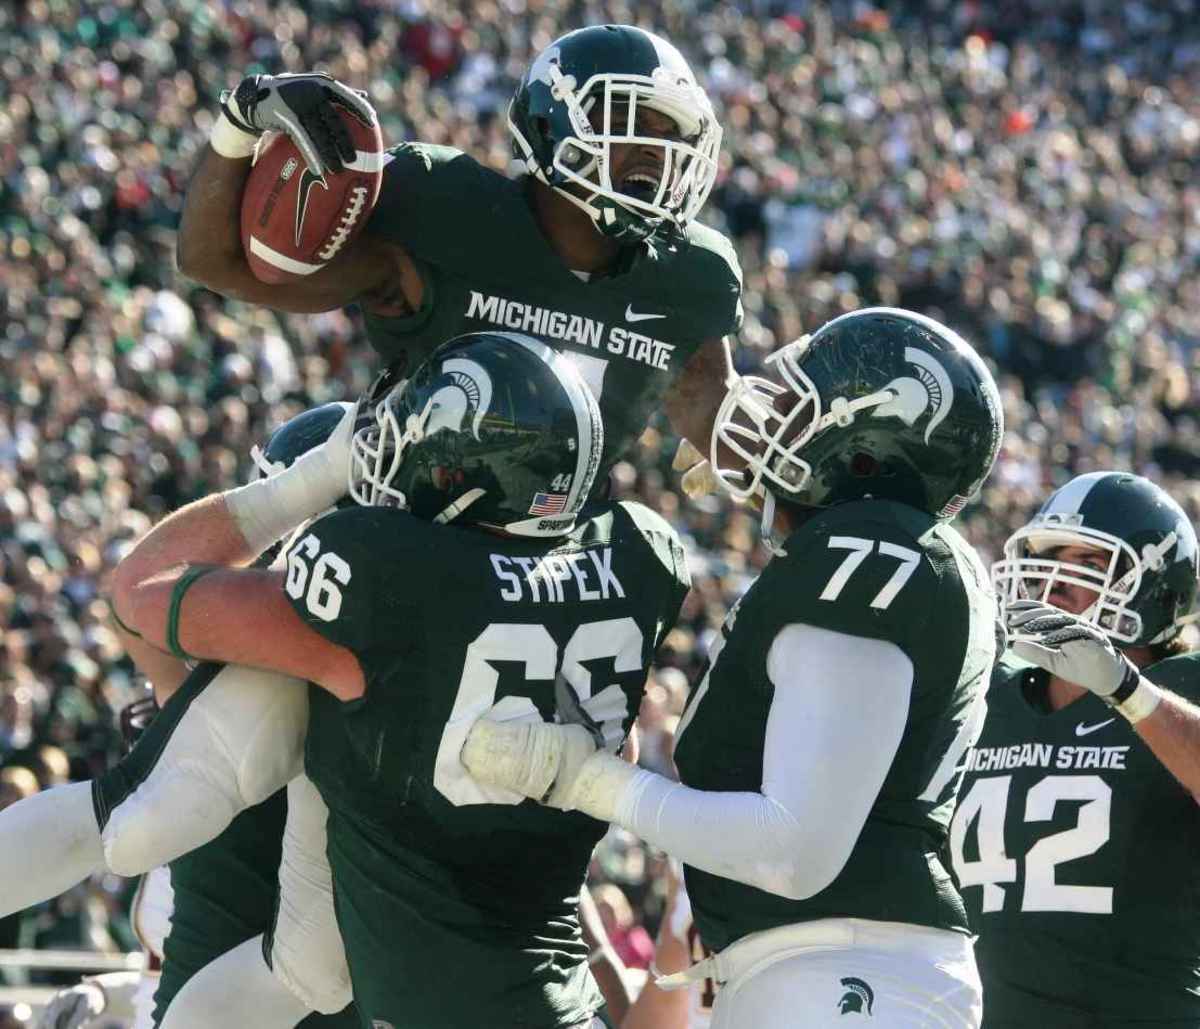 The Spartans remain atop the Big Ten as week twelve approaches.  Photo courtesy of Bill Marklevits.